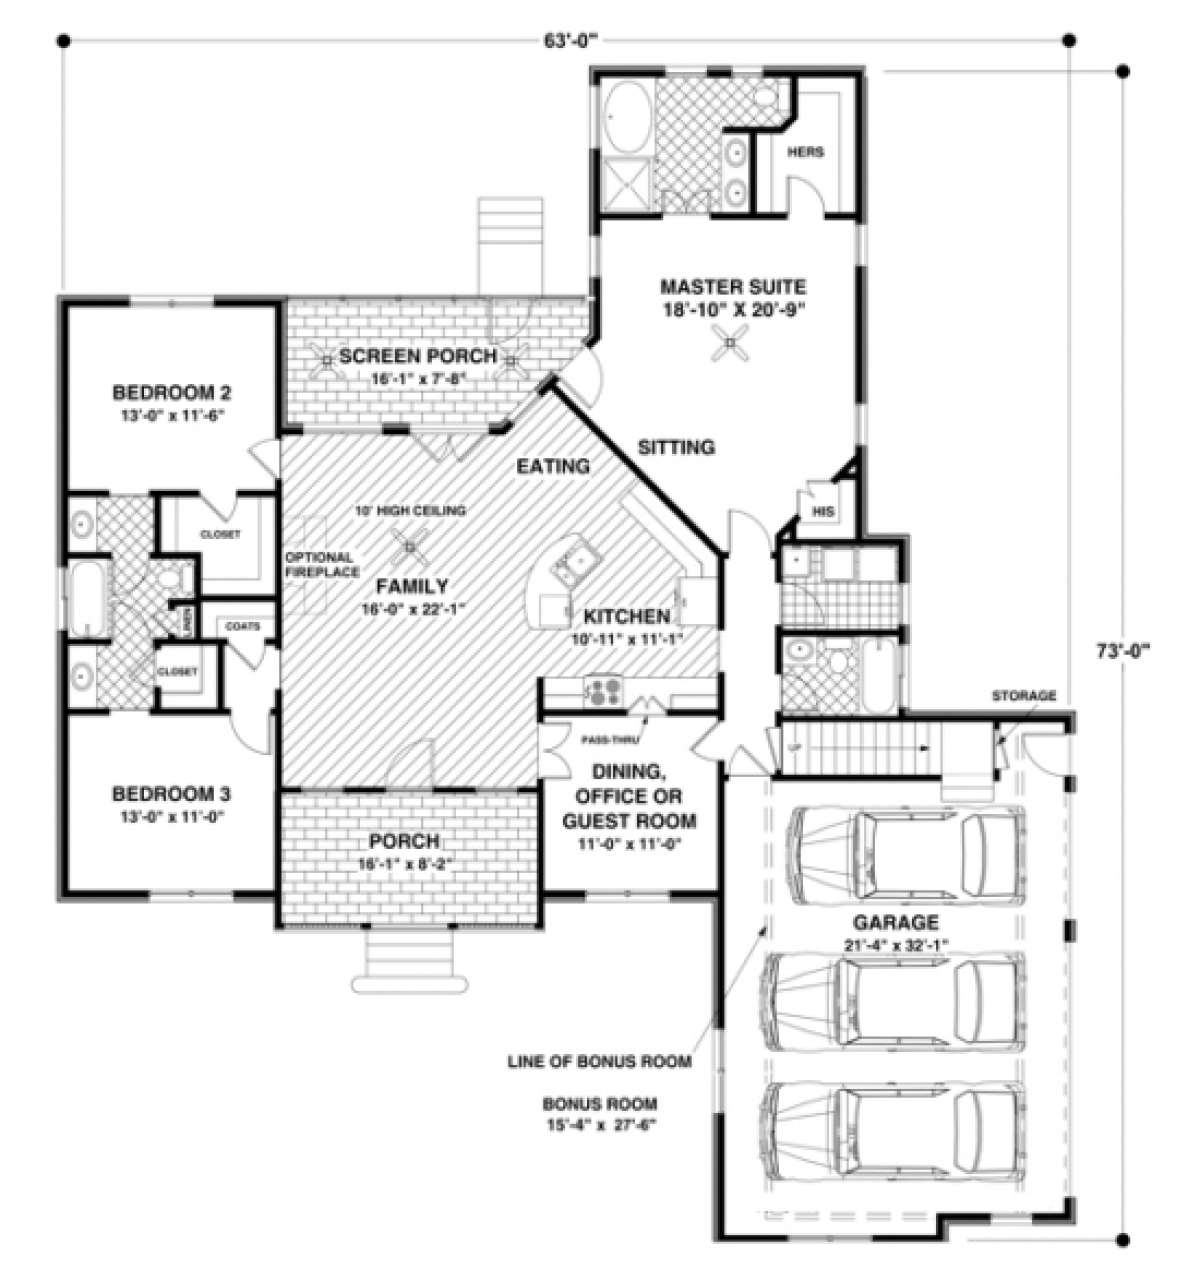 Traditional Plan: 1,800 Square Feet, 3-4 Bedrooms, 3 Bathrooms - 036-00061